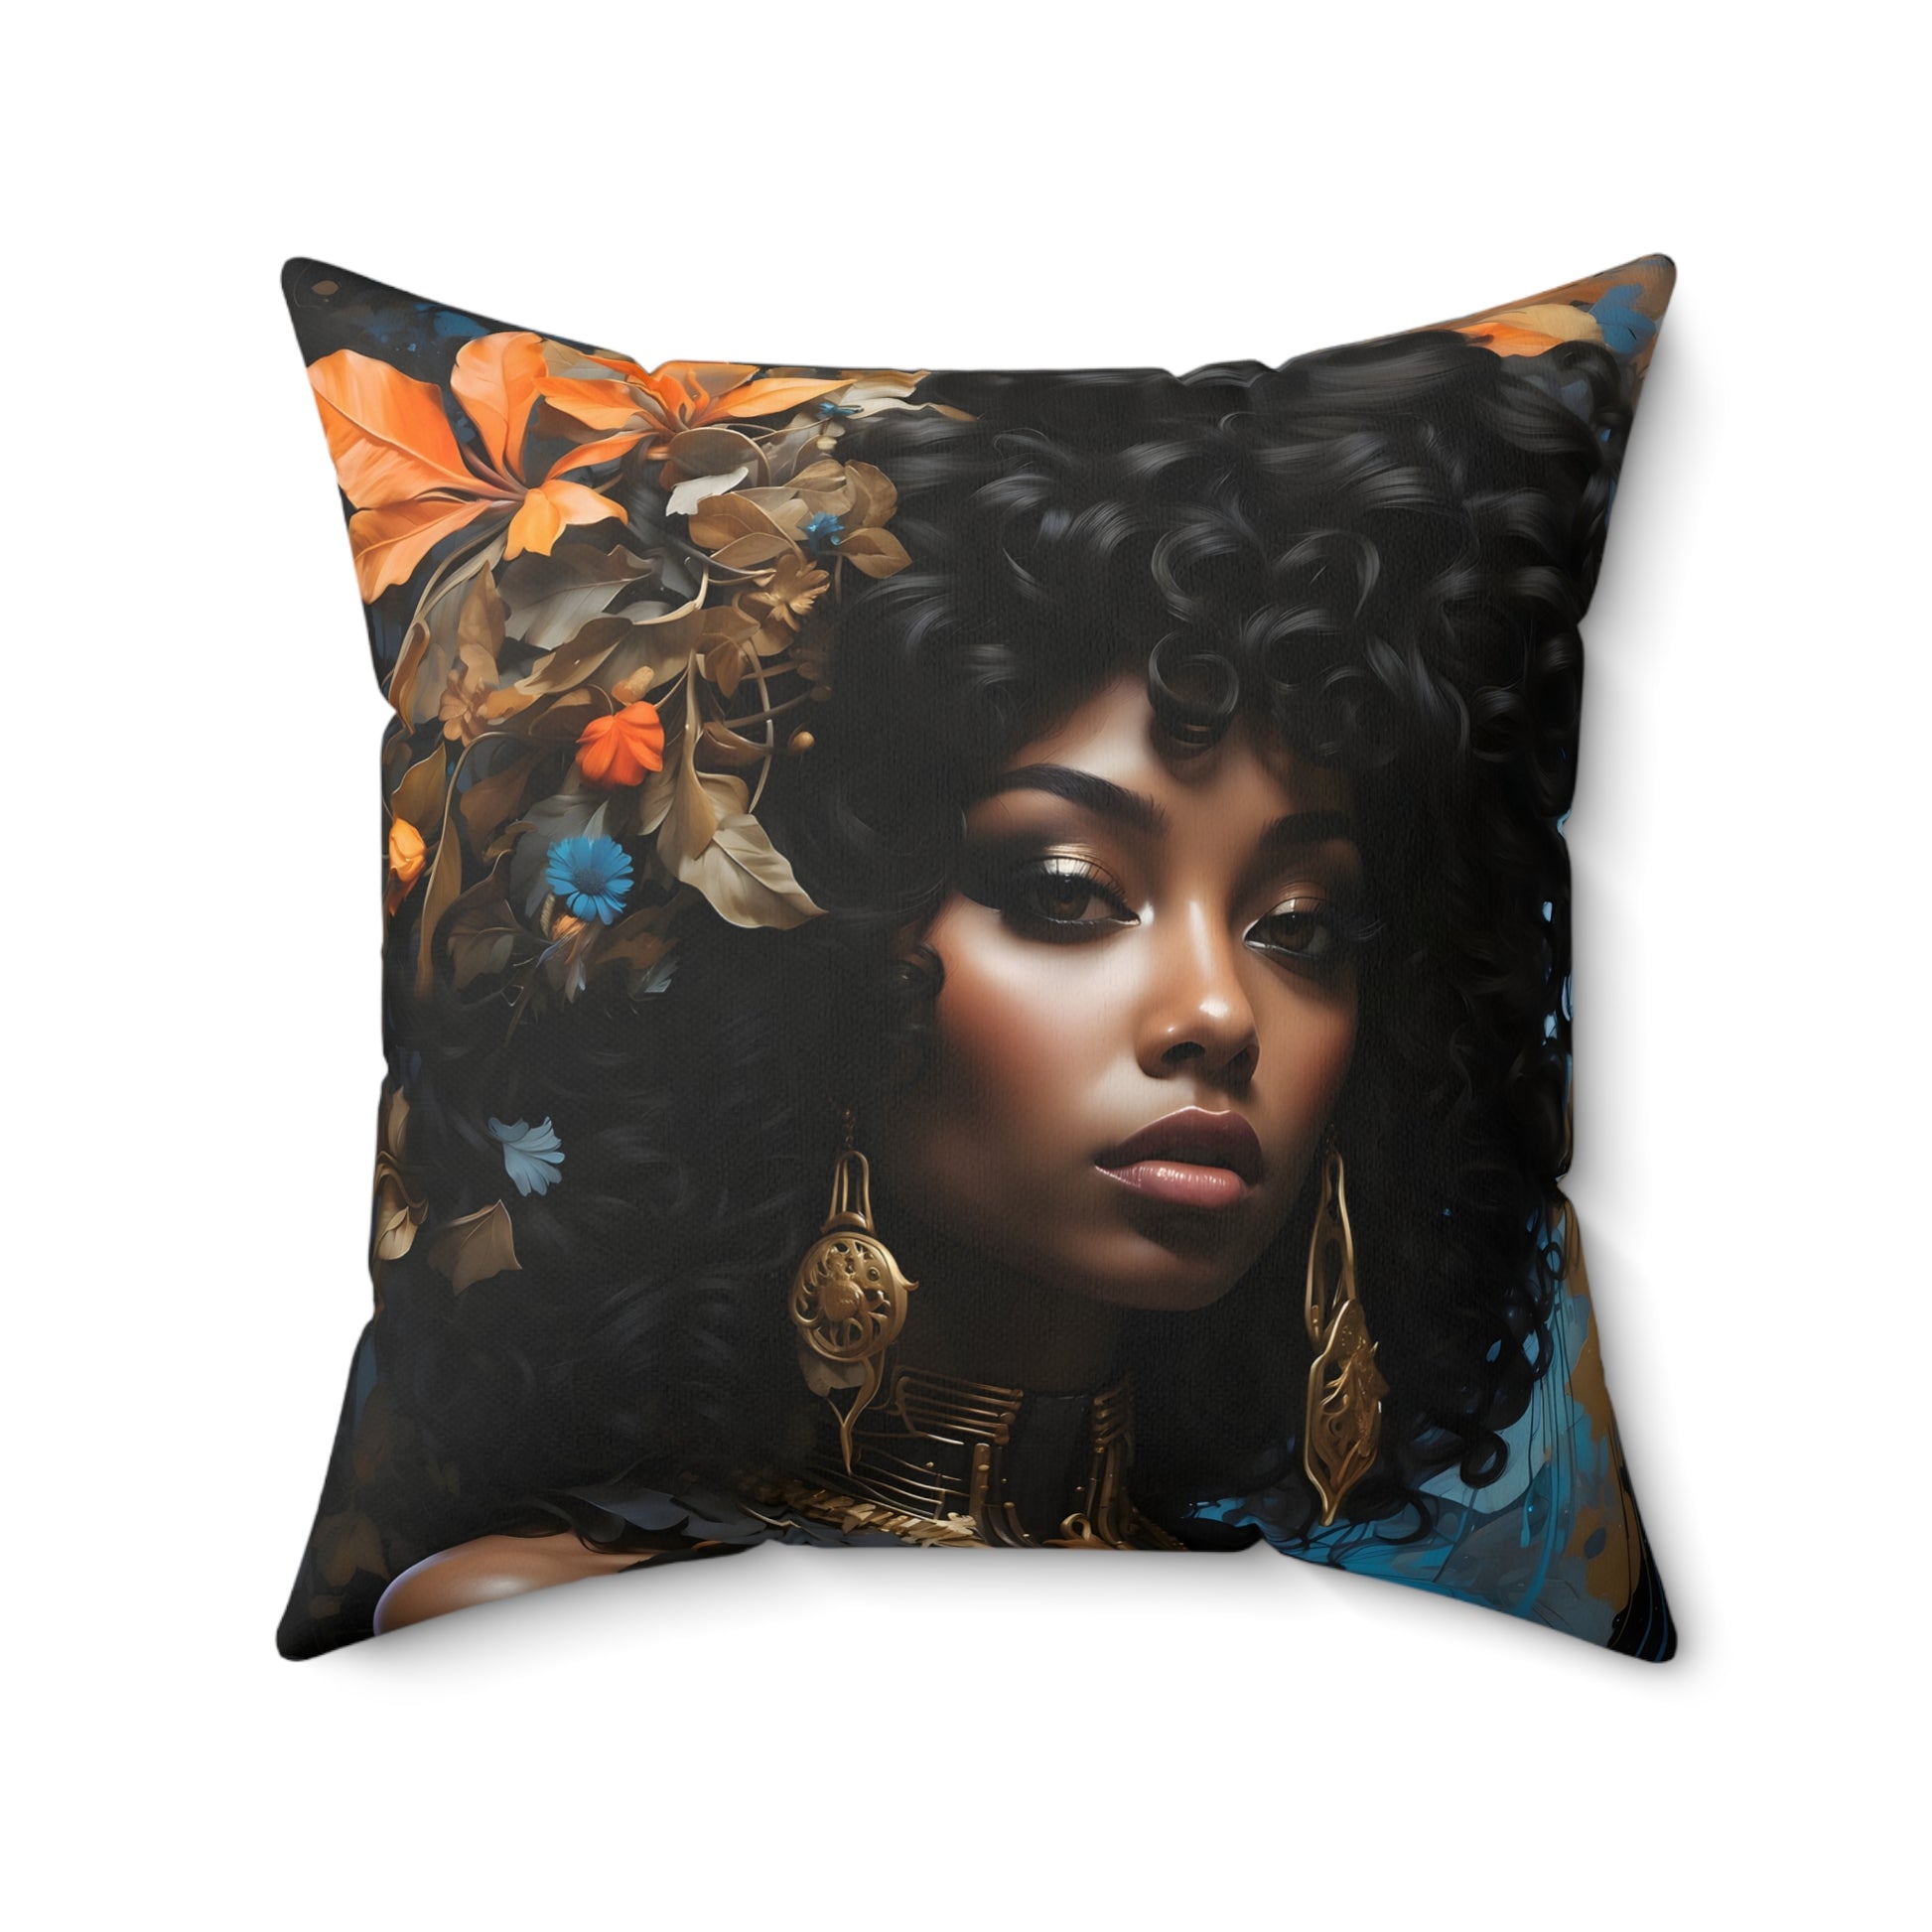 Square Portrait Pillow featuring a beautiful African American woman profile, made with 100% Polyester cover and pillow, includes concealed zipper.